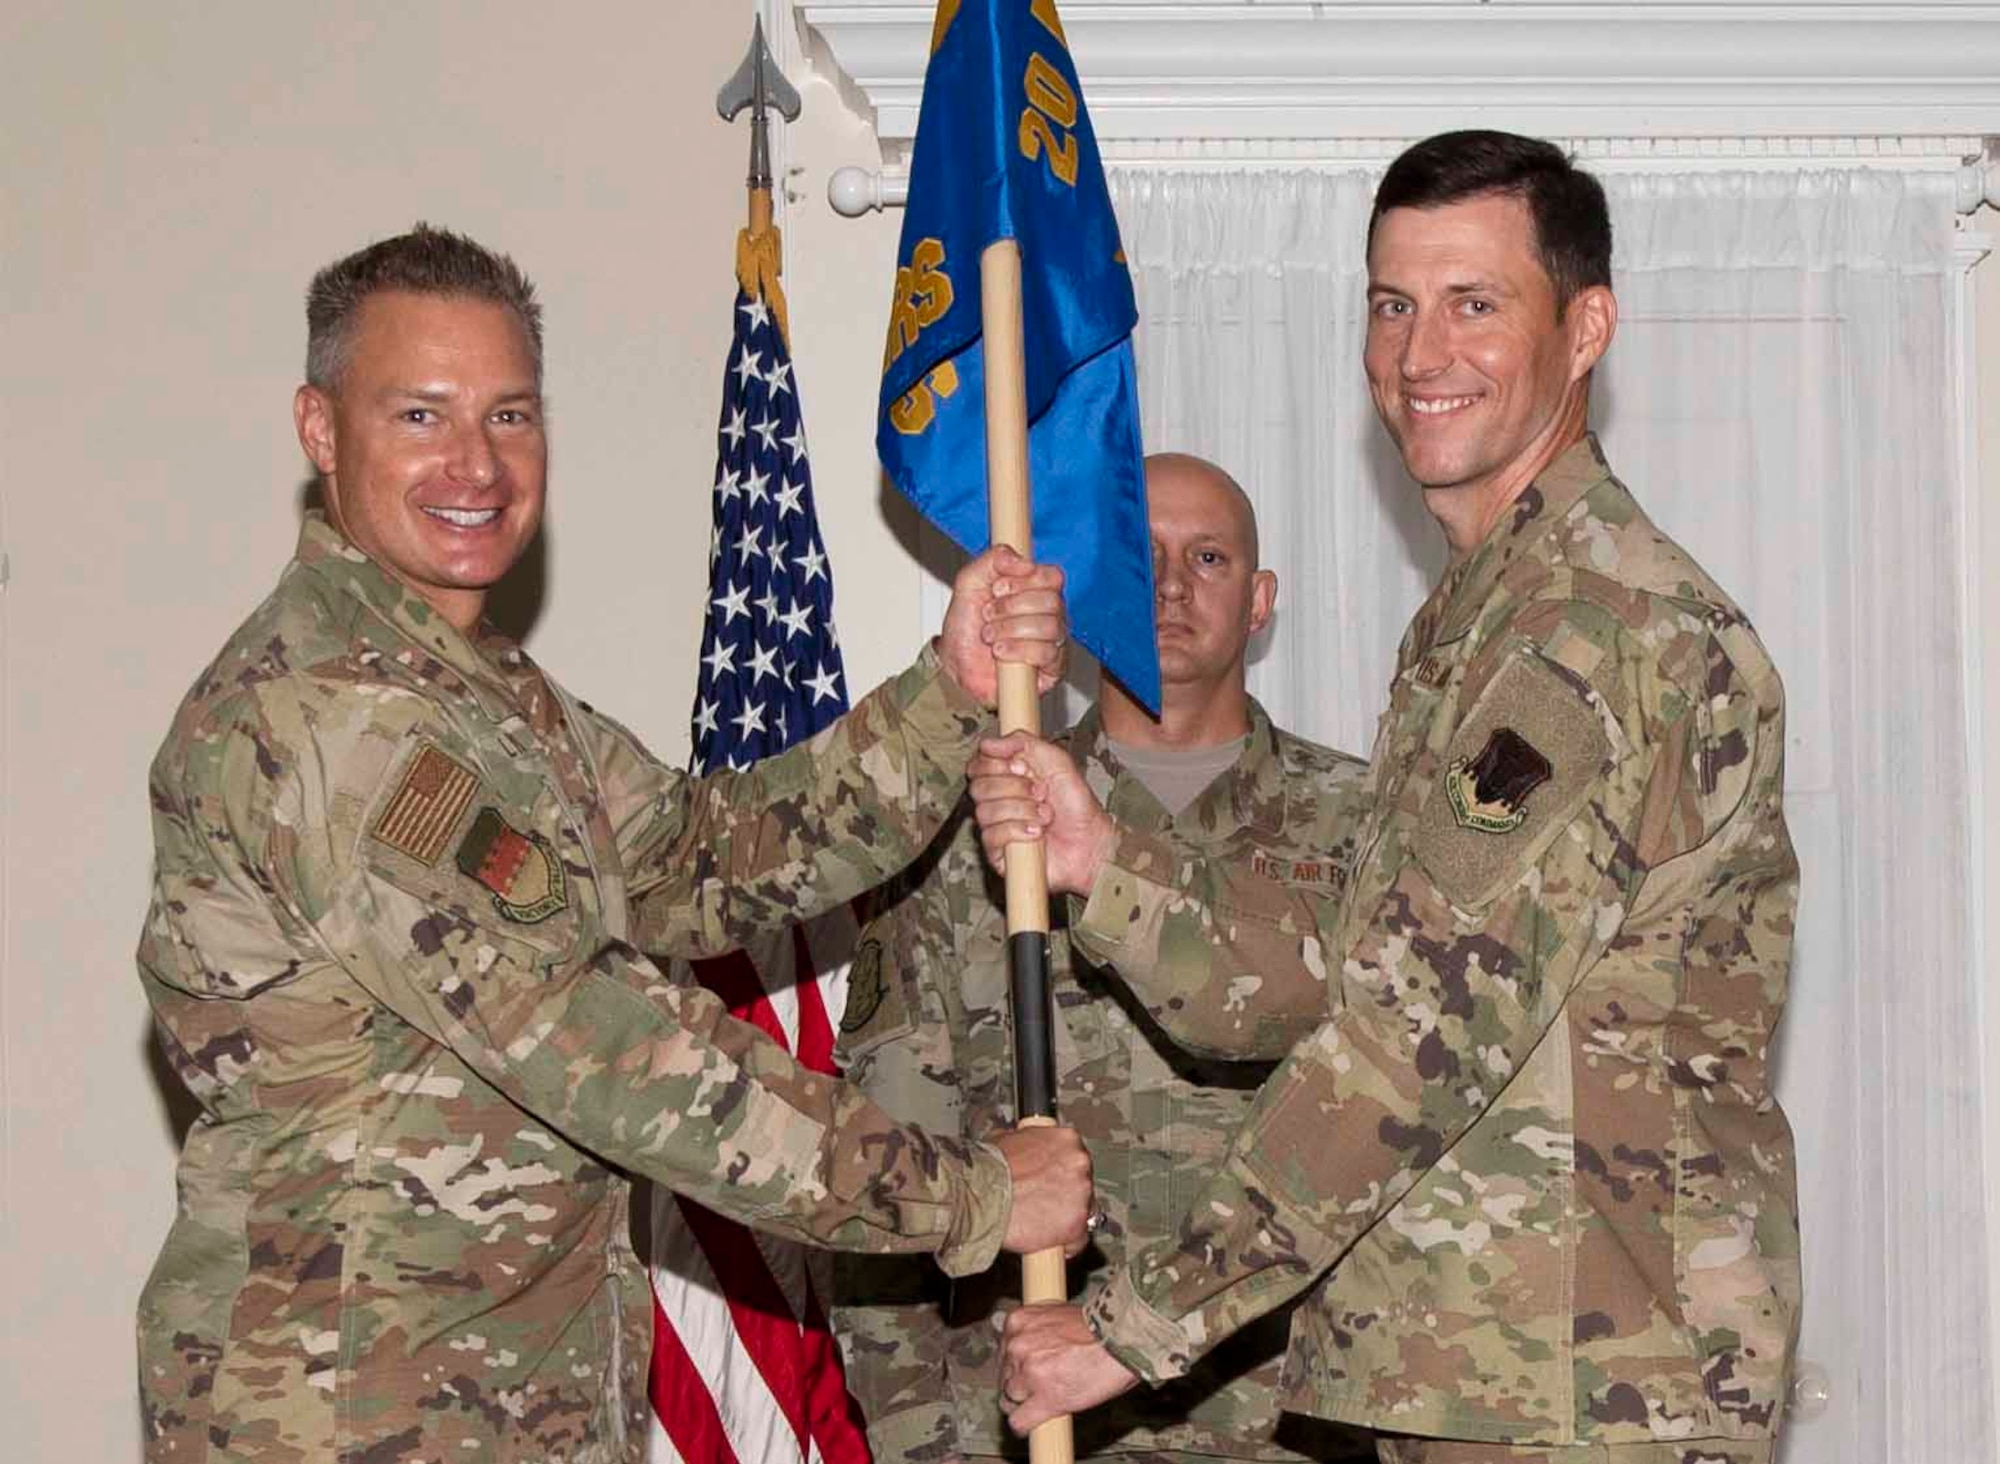 U.S. Air Force Lt. Col. Benjamin Gantt, 20th Operational Medical Readiness Squadron (OMRS) commander, right, assumes command of the 20th OMRS from Col. Christian Lyons, 20th Medical Group commander, at Shaw Air Force Base, South Carolina, July 18, 2019.